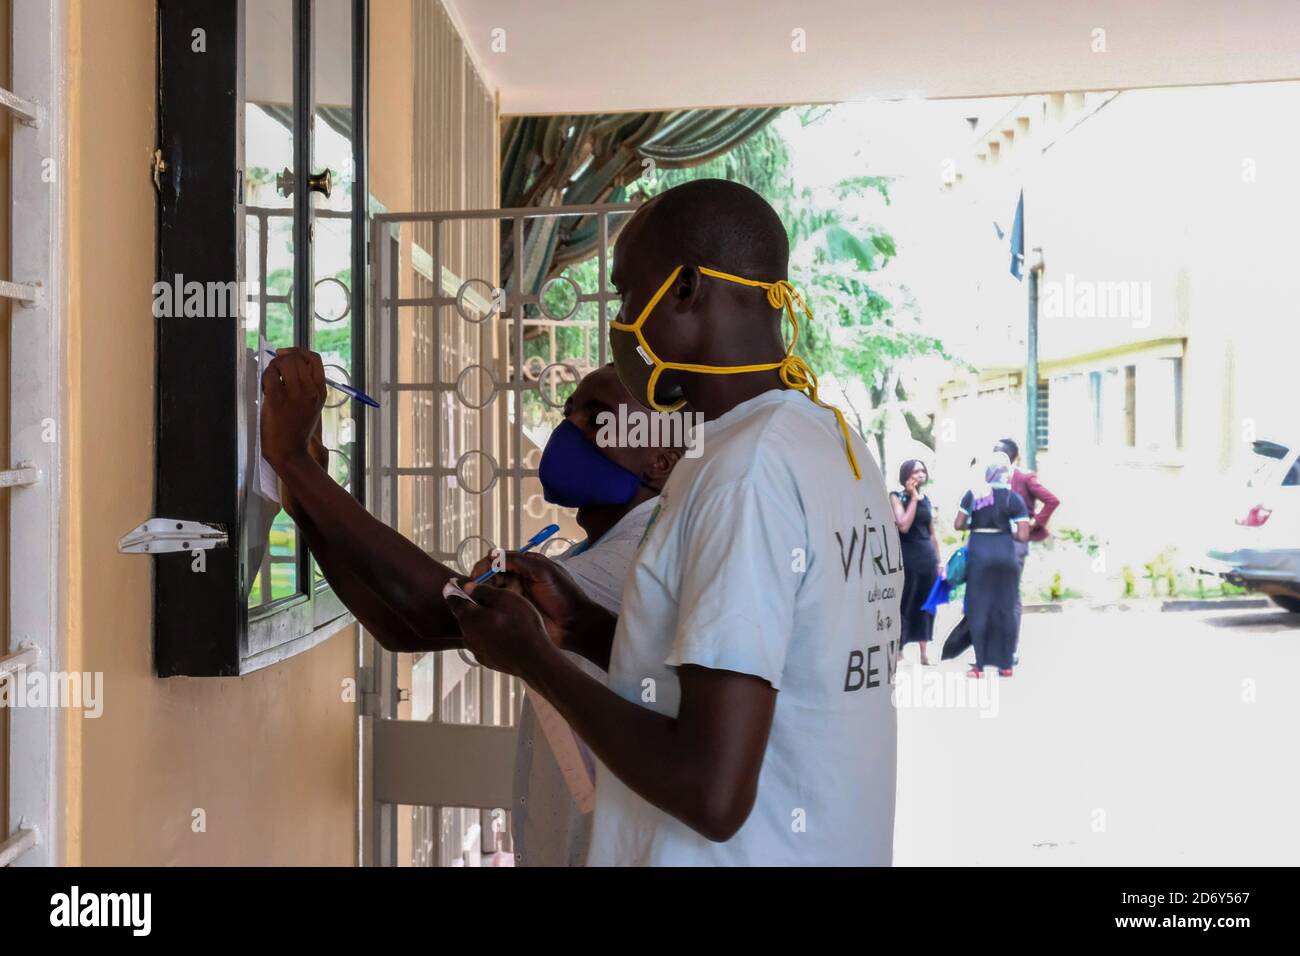 (201020) --KAMPALA, Oct. 20, 2020 (Xinhua) -- Students wearing face masks check a notice board at Makerere University in Kampala, Uganda, Oct. 19, 2020. Ugandan schools on Oct. 15 reopen for candidate students to resume studies after seven months of the government closure over COVID-19 pandemic. (Photo by Hajarah Nalwadda/Xinhua) Stock Photo